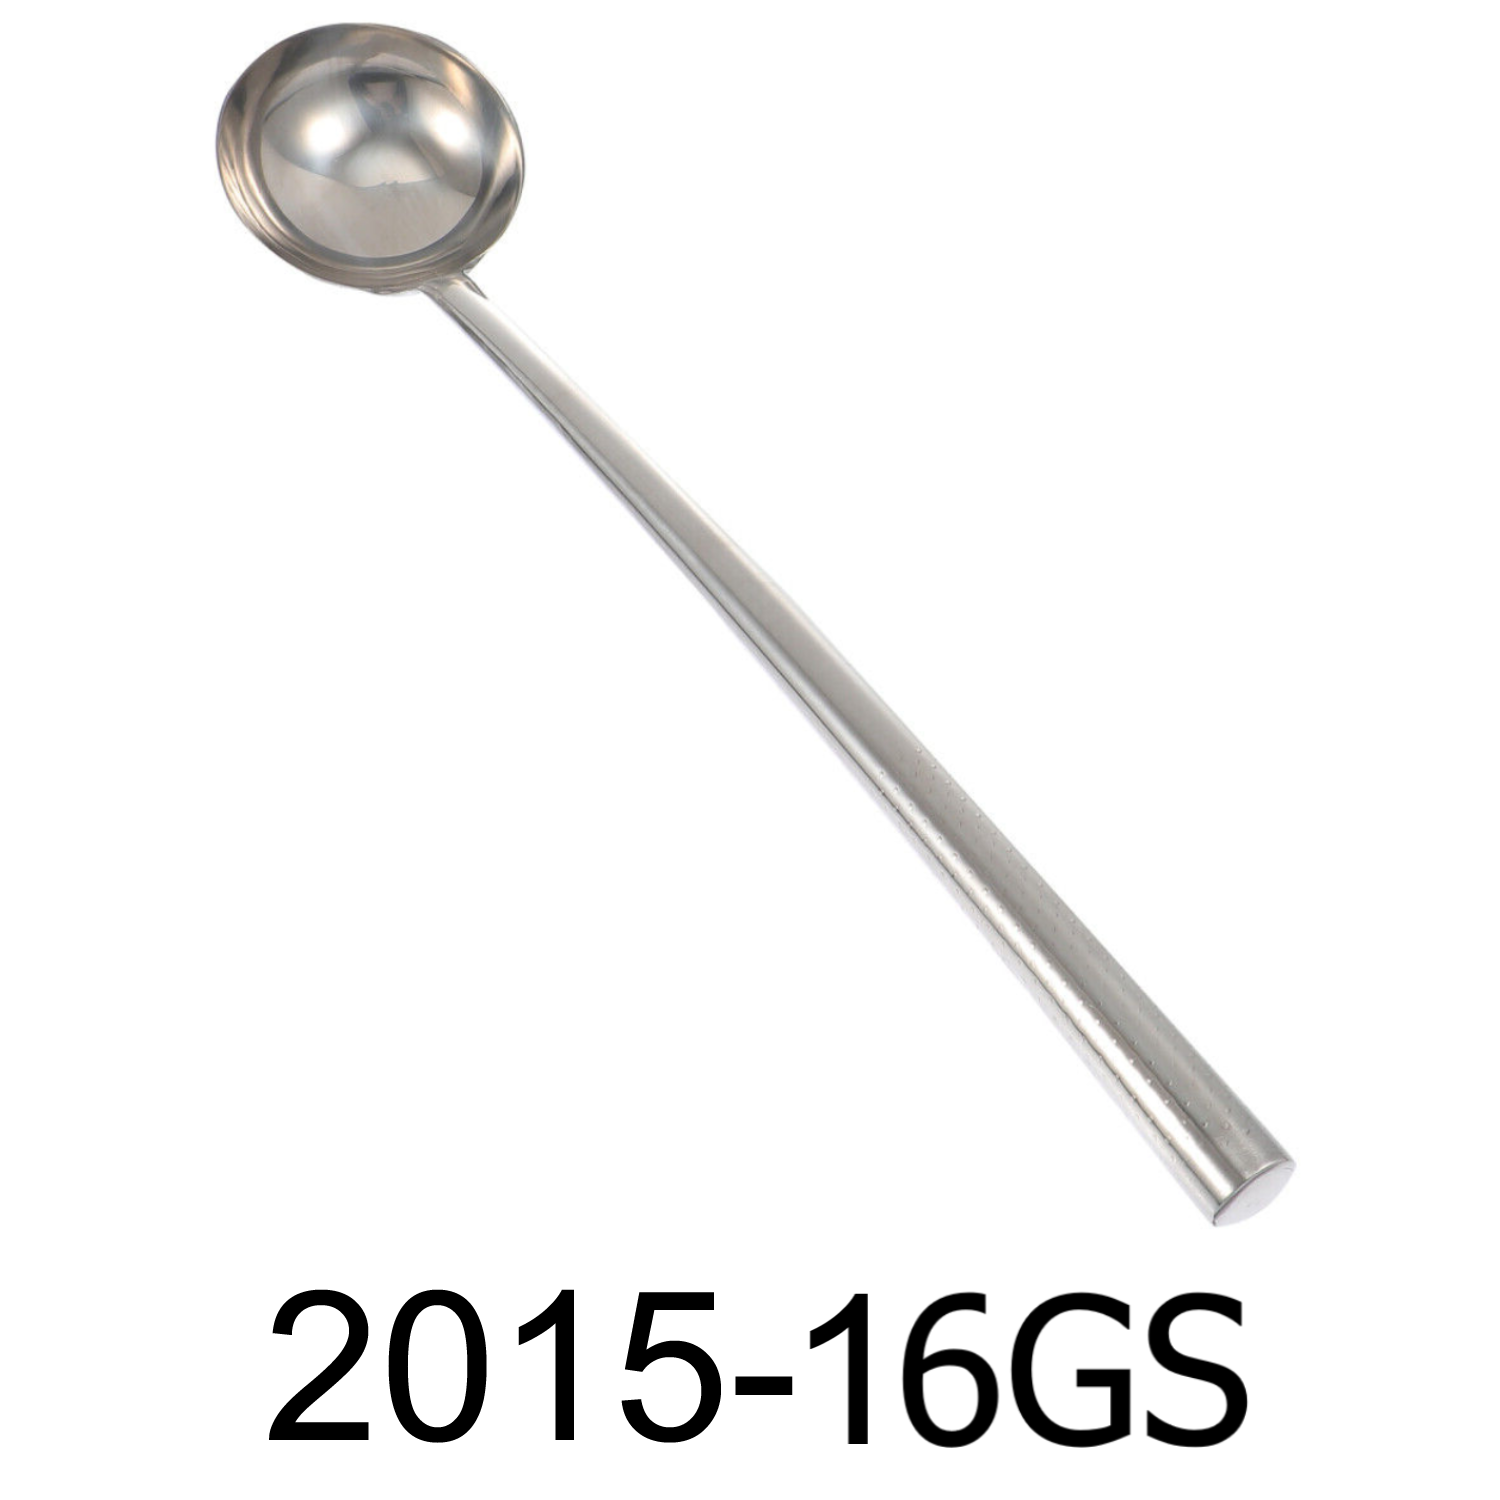 10 Stainless Steel Wooden Handle Soup Ladle Spoon | Harfington